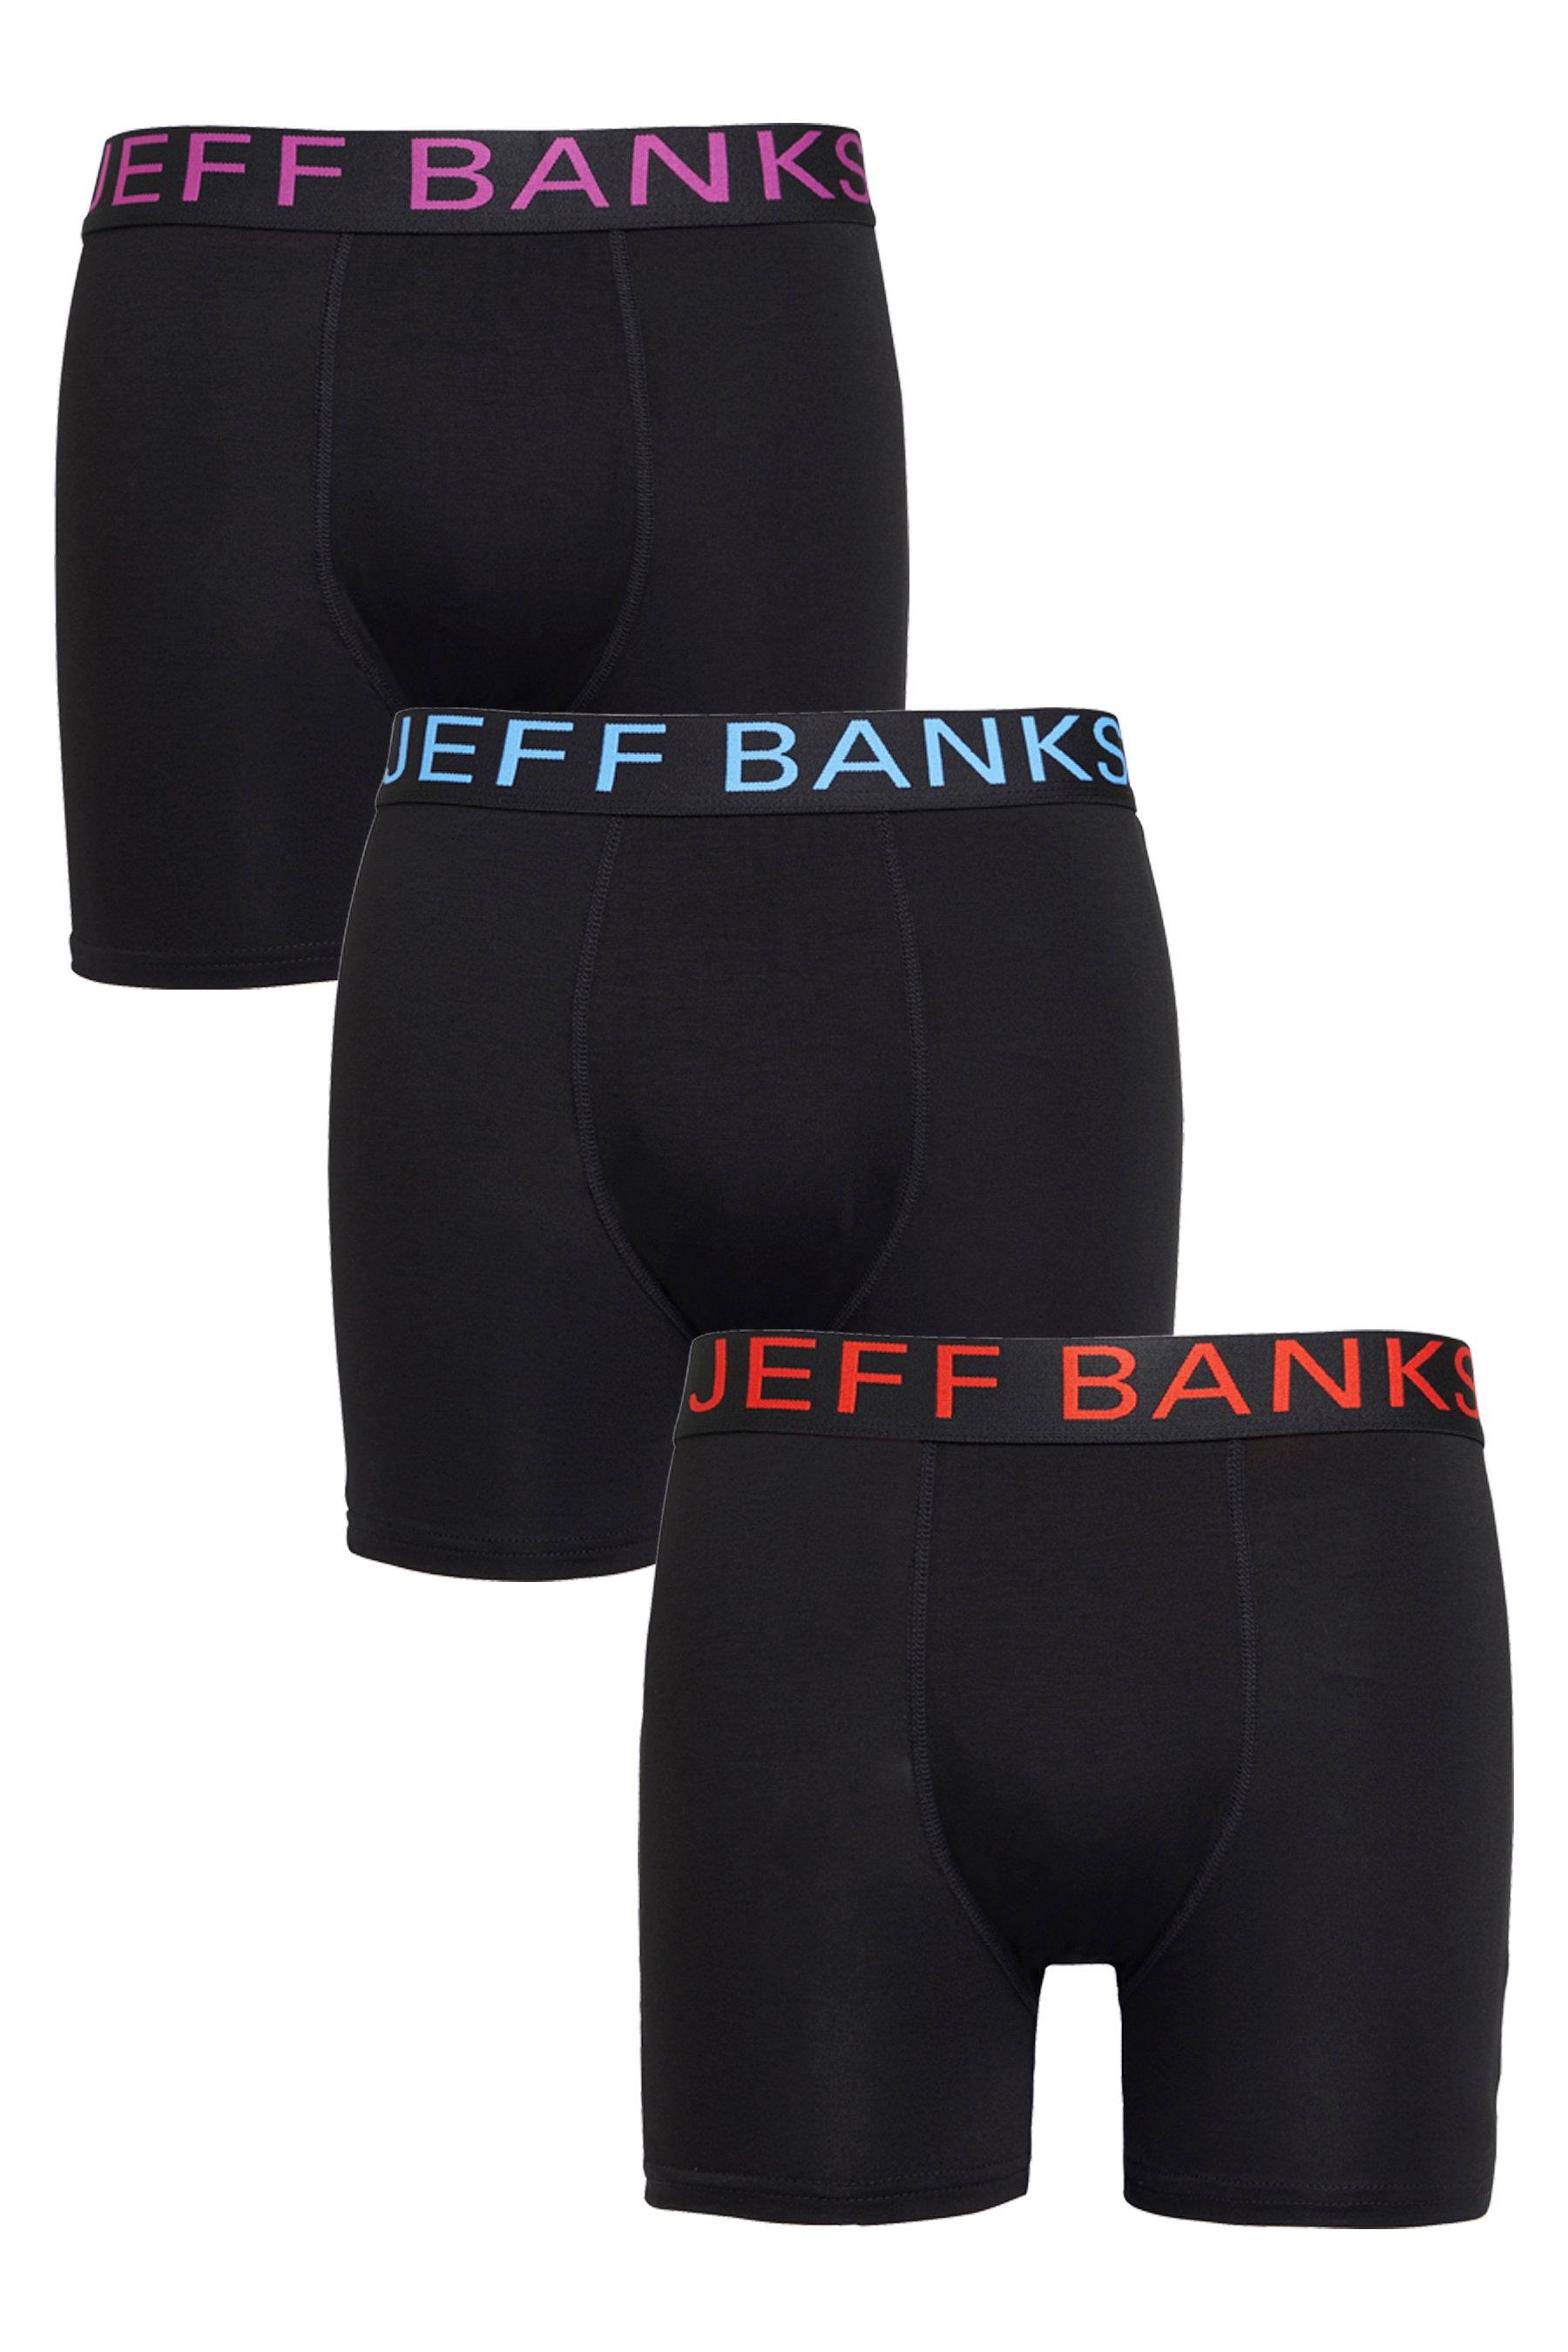 jeff banks pack of 3 bamboo black trunks - mens - size: small